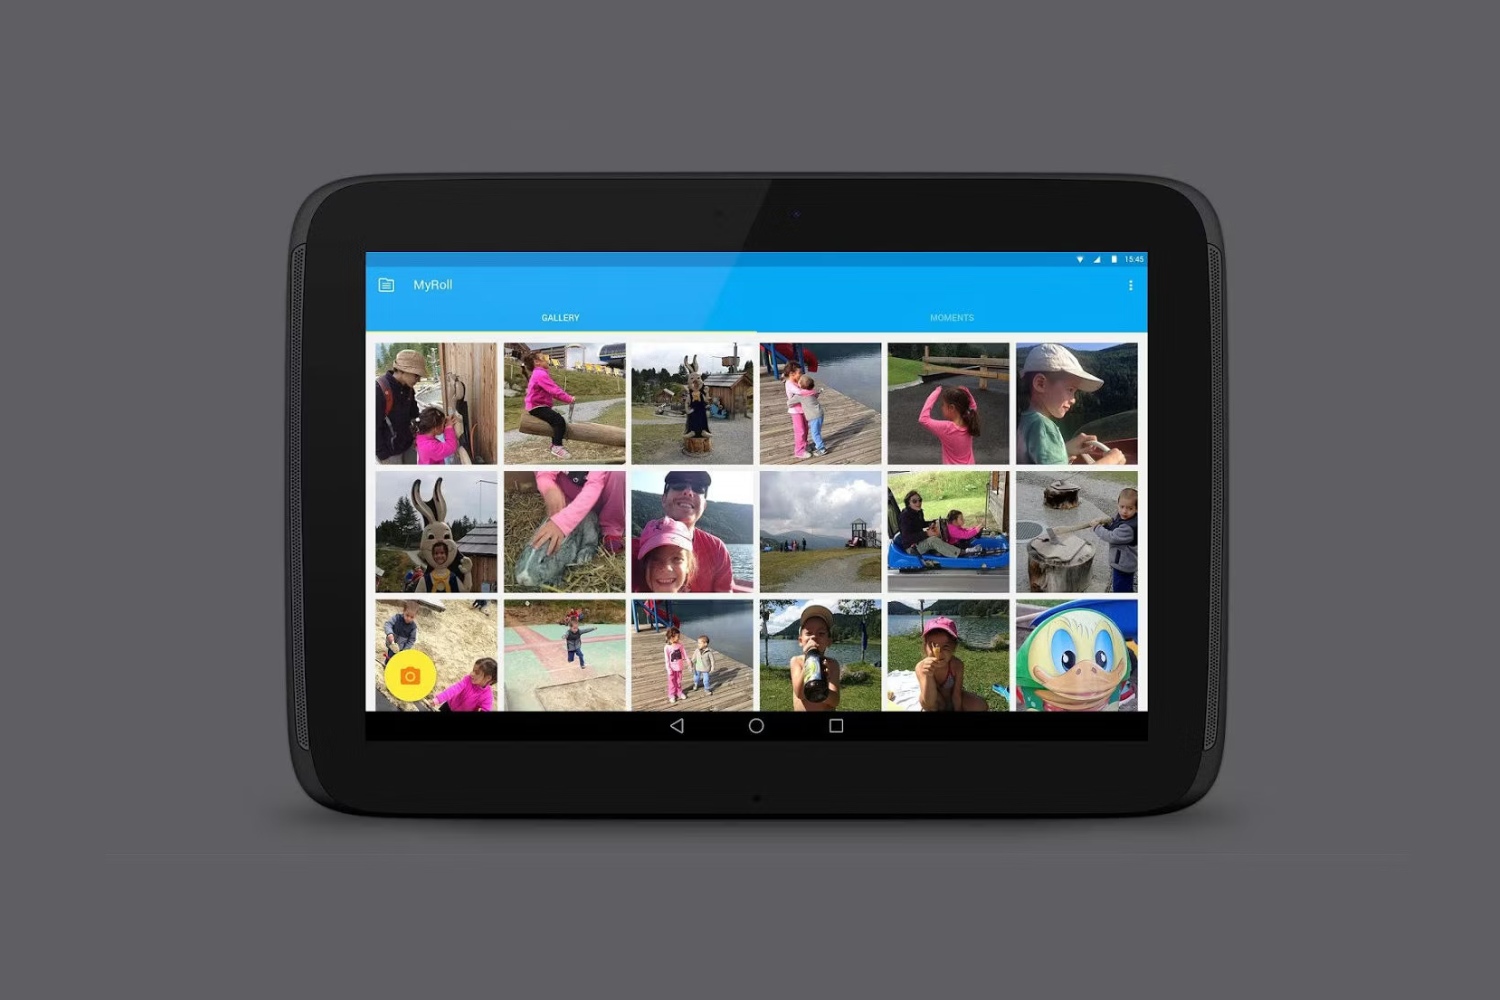 How To Delete Photos On Android Tablet